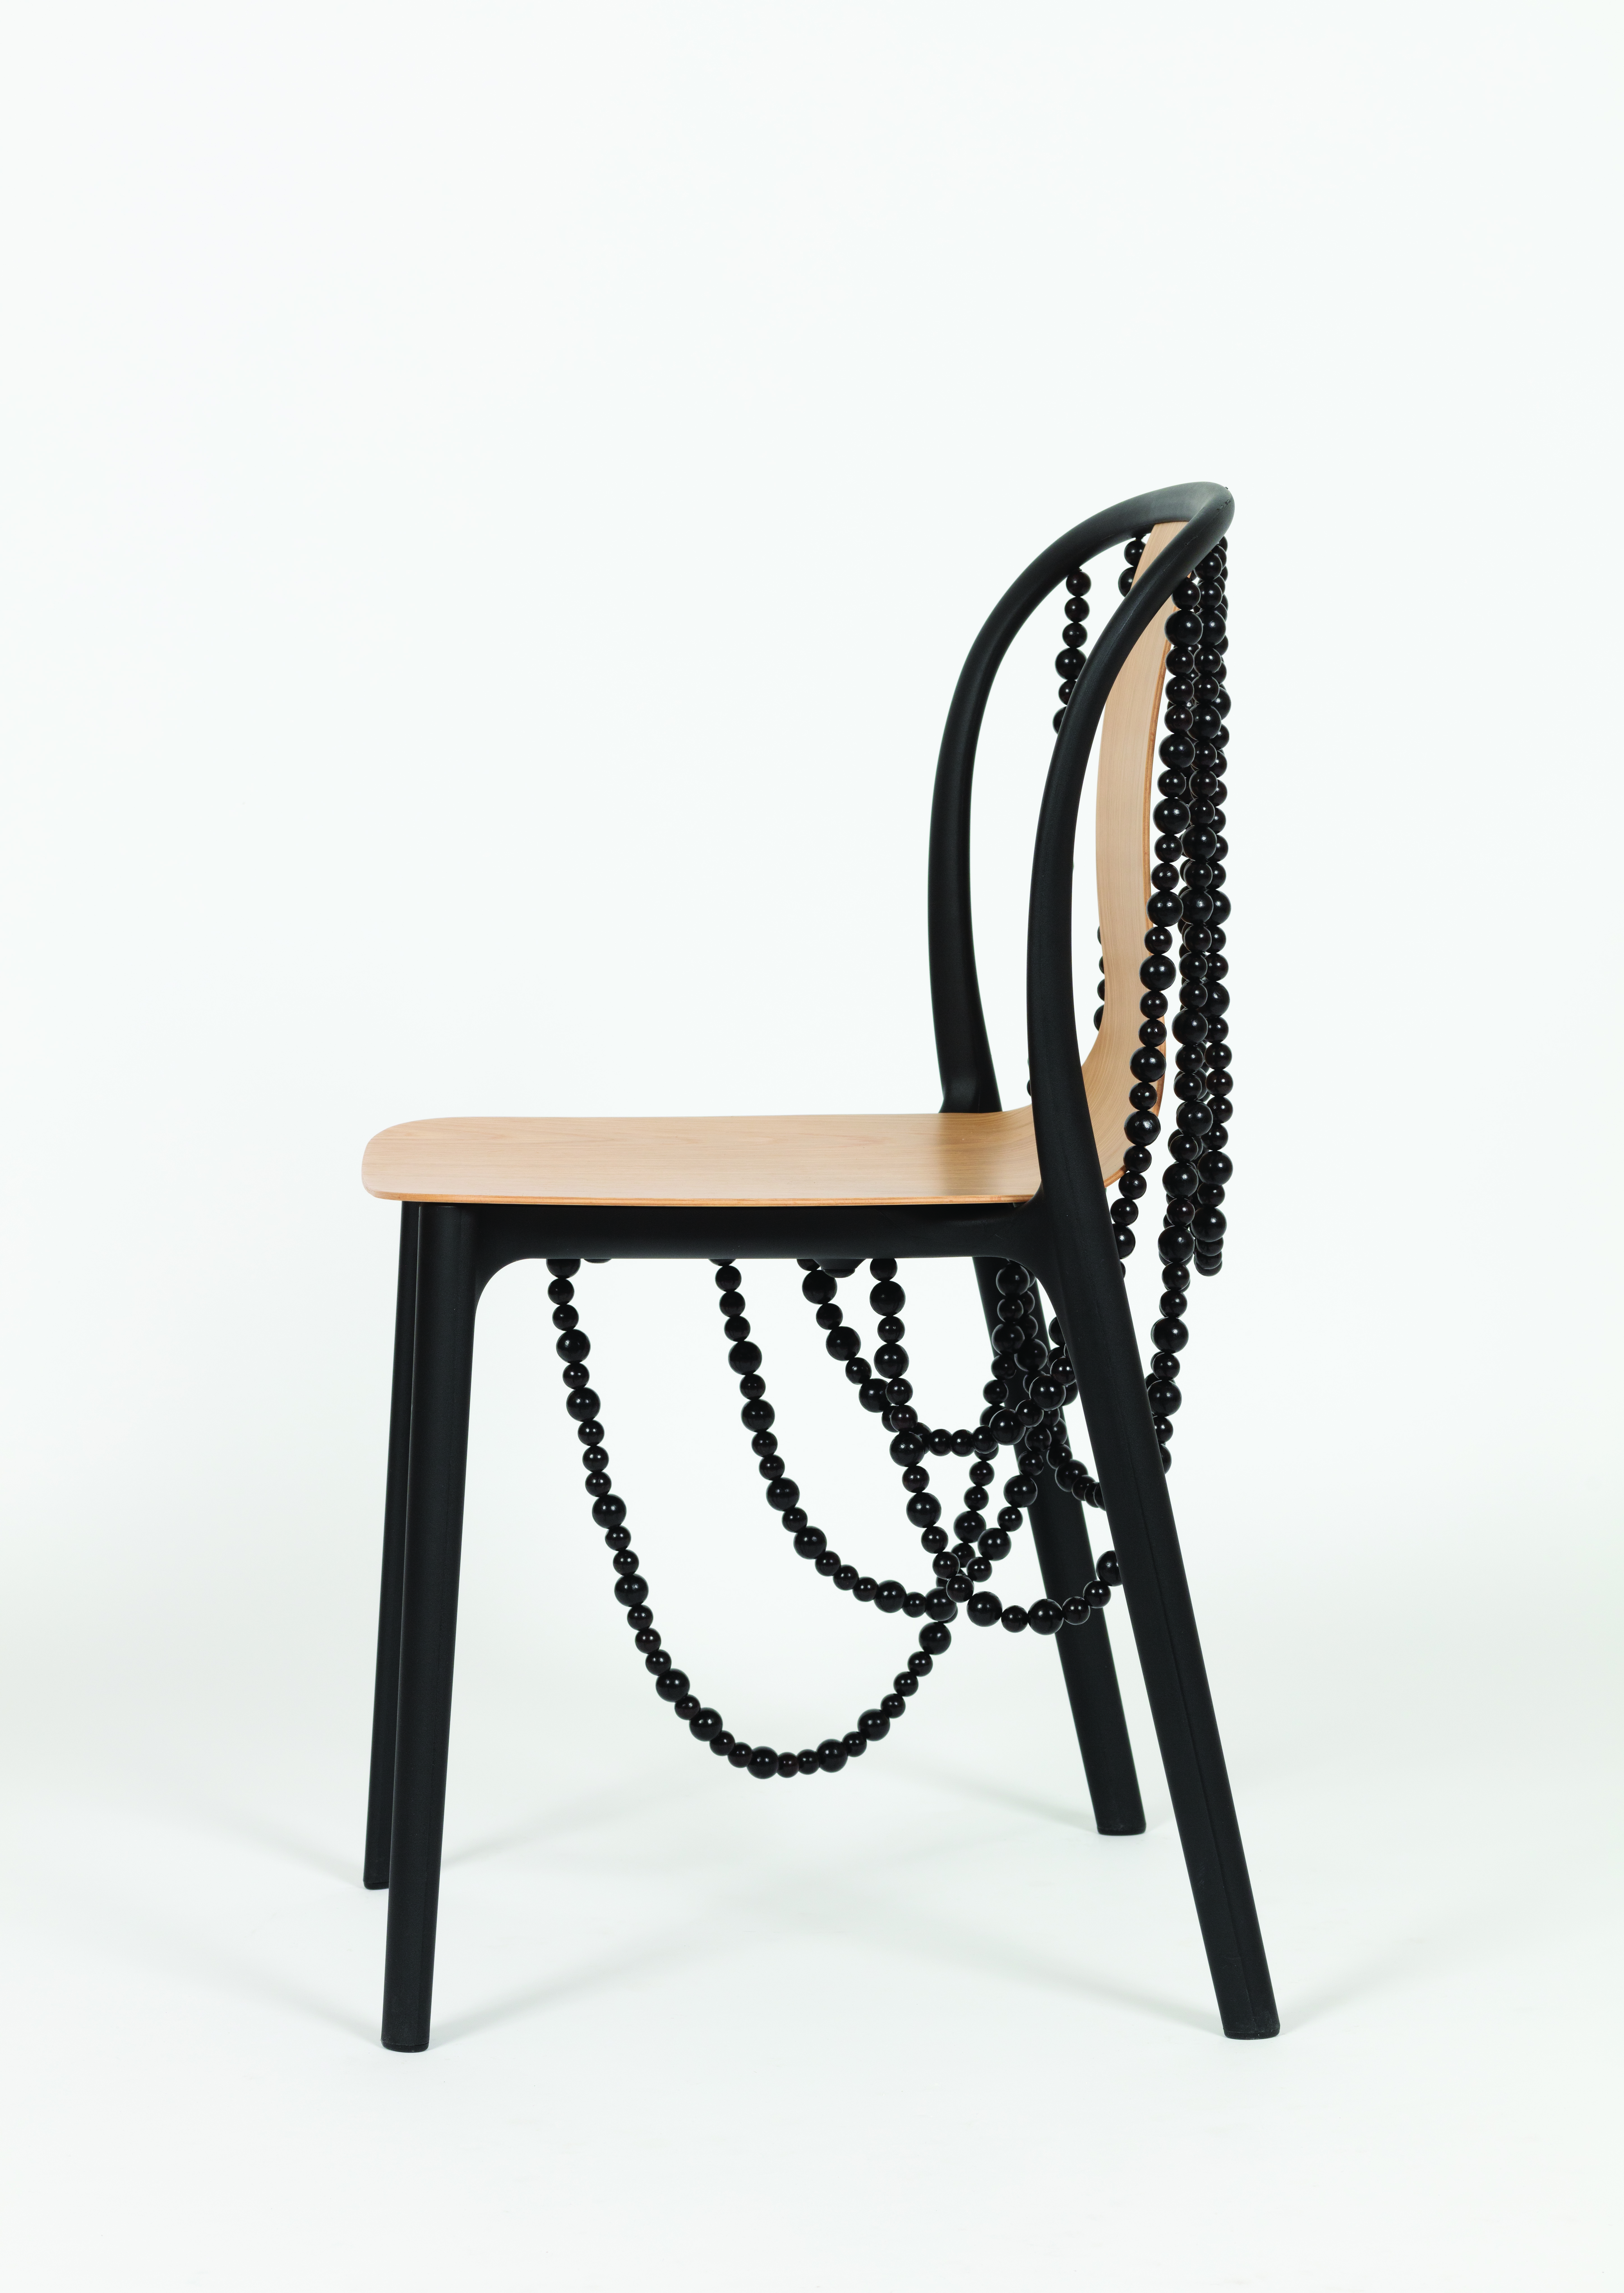 Belleville chair with pearls